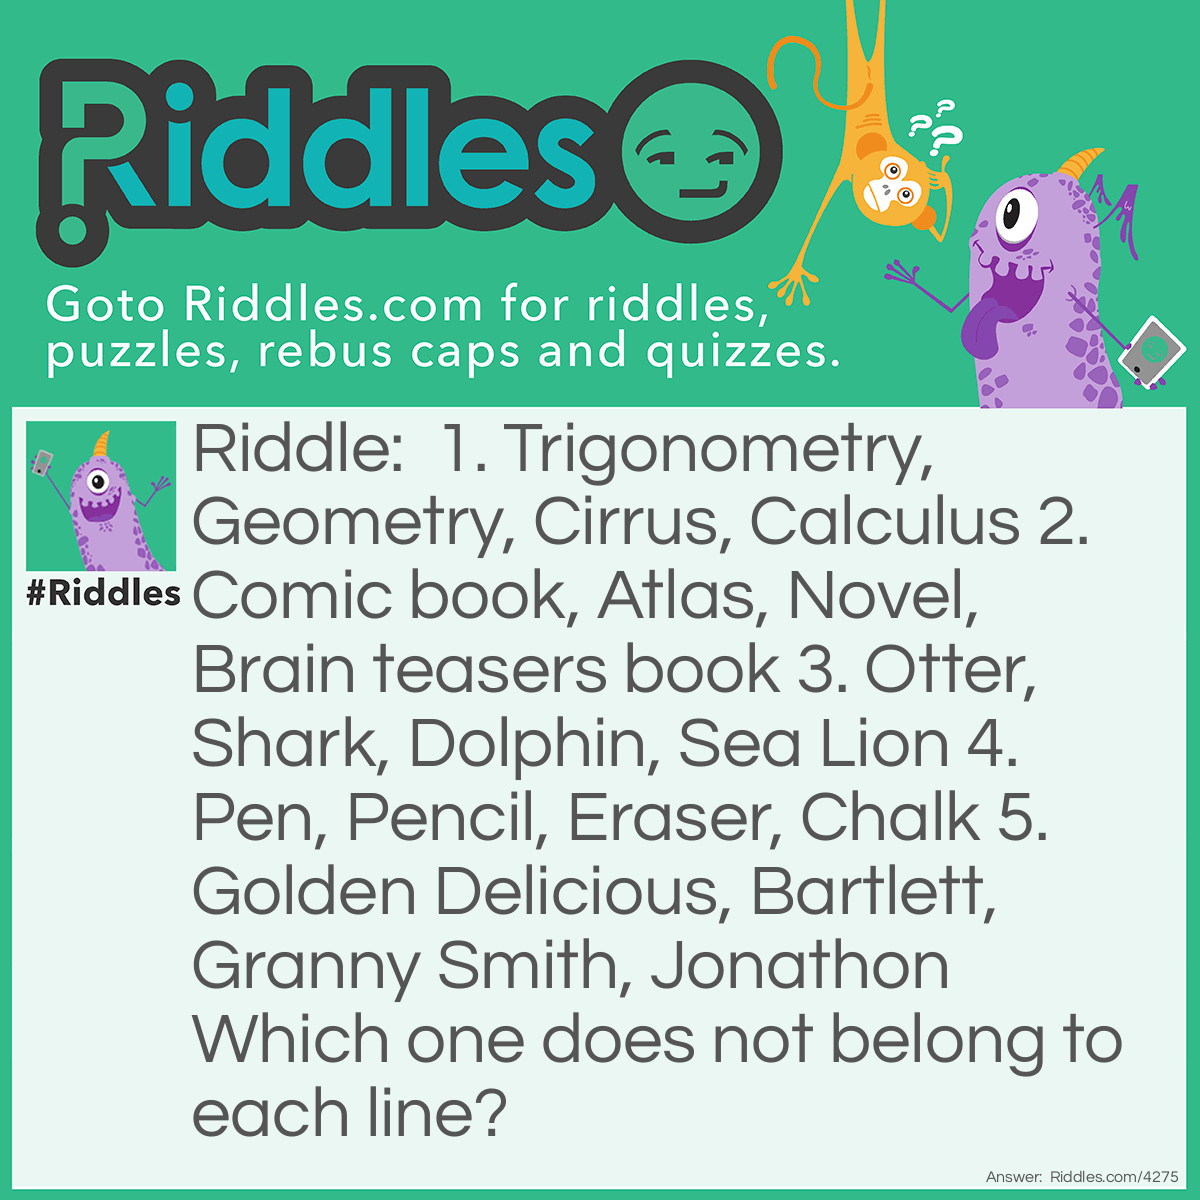 Riddle: 1. Trigonometry, Geometry, Cirrus, Calculus
2. Comic book, Atlas, Novel, <a href="https://www.riddles.com/brain-teasers">Brain teasers</a> book
3. Otter, Shark, Dolphin, Sea Lion
4. Pen, Pencil, Eraser, Chalk
5. Golden Delicious, Bartlett, Granny Smith, Jonathon
Which one does not belong to each line? Answer: 1. Cirrus because the others are all mathematics
2. Atlas because the others are all for leisure/pleasure reading
3. Shark because the others are all marine mammals
4. Chalk because the others are all desk tools
5. Bartlett because the others are types of apples